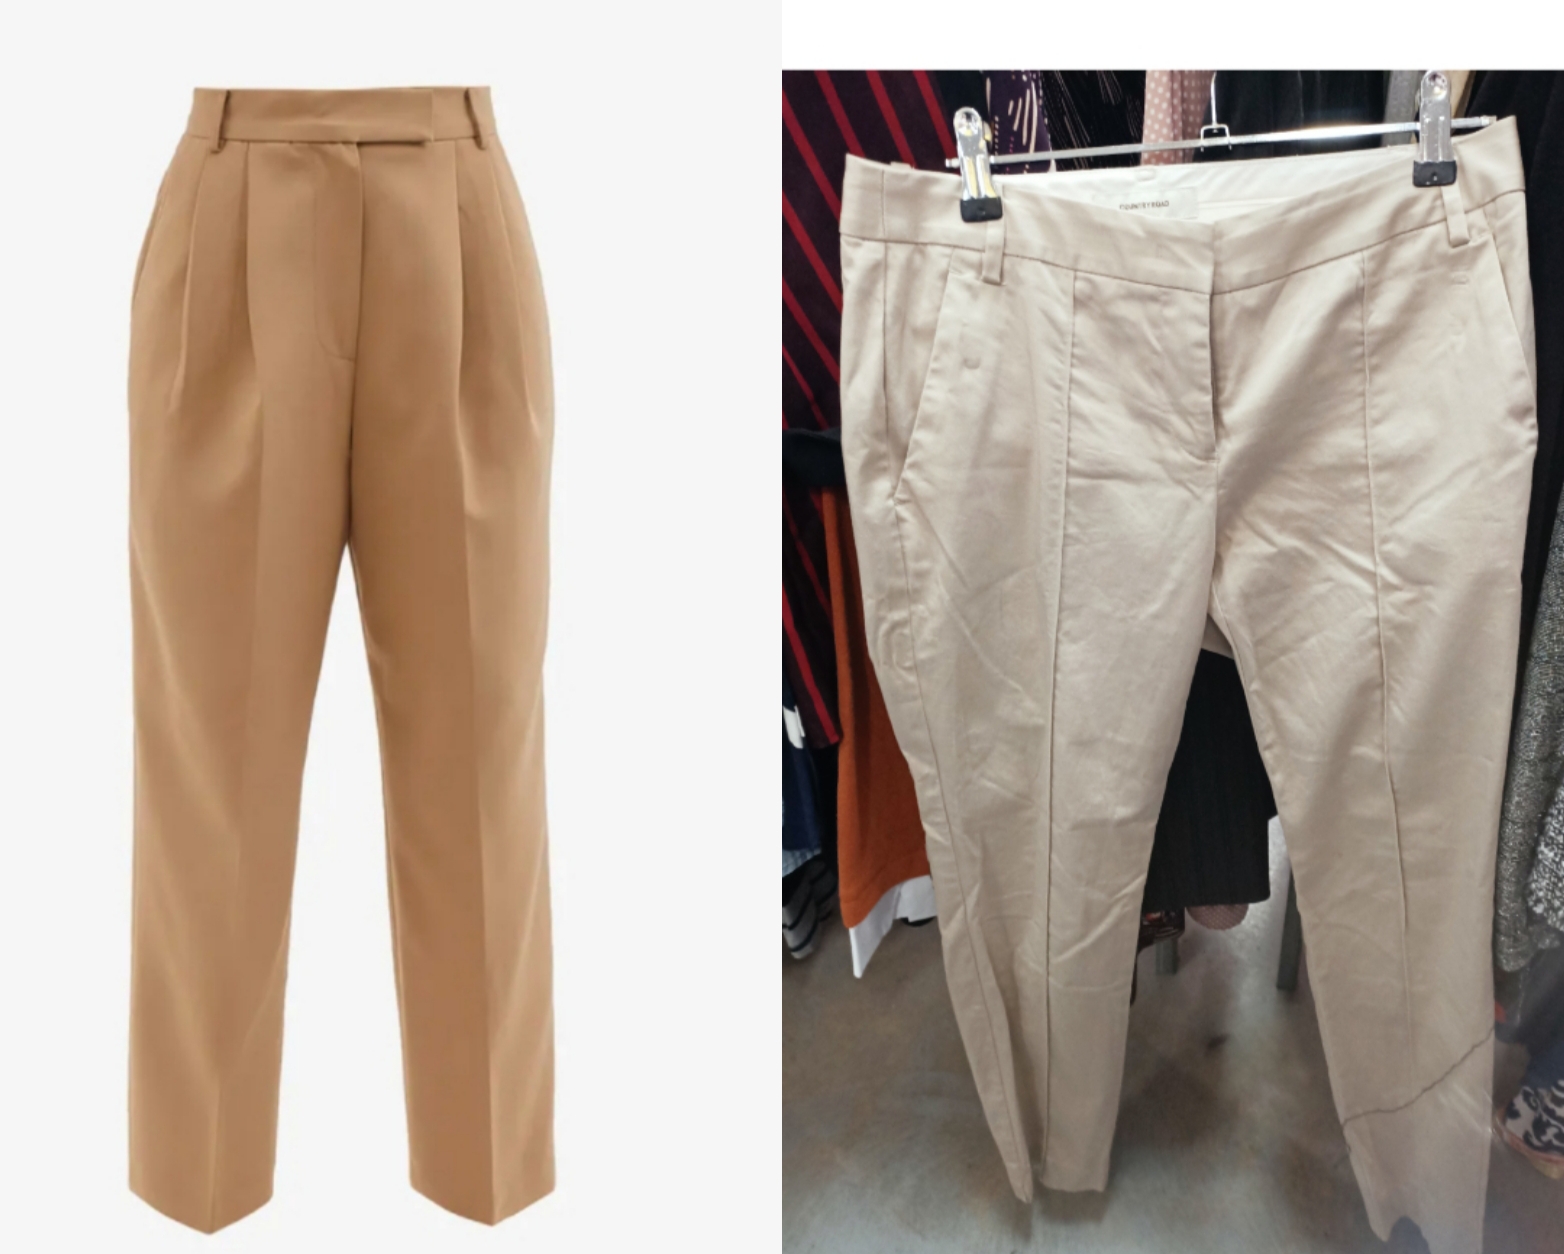 The tailored trousers